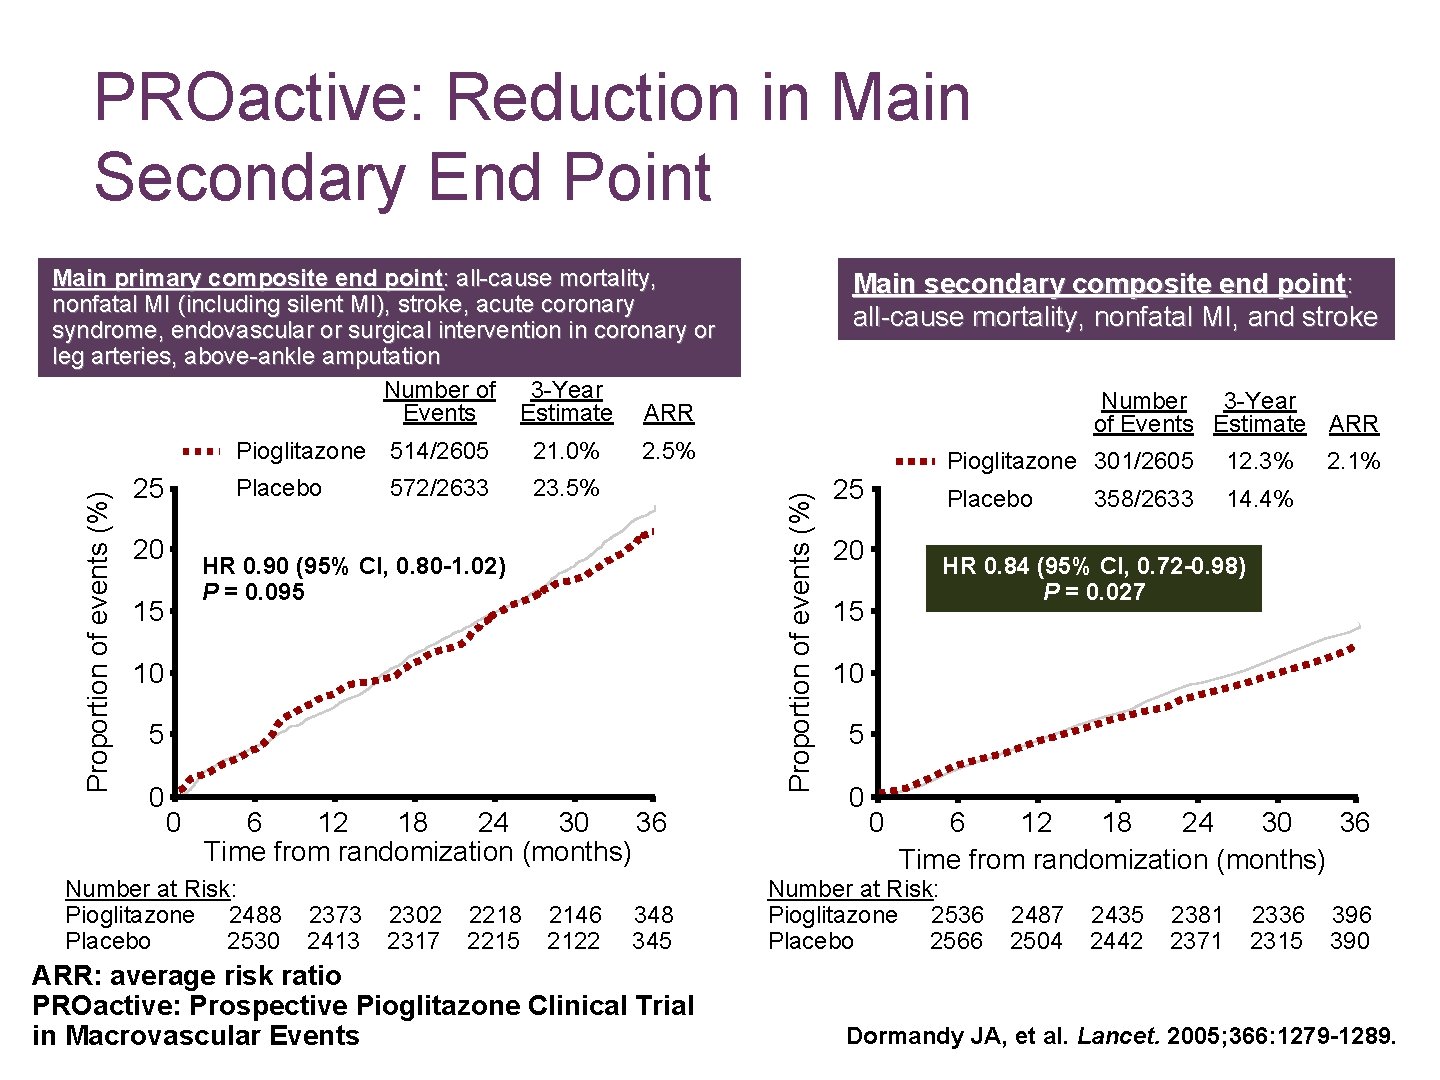 PROactive: Reduction in Main Secondary End Point 25 20 Pioglitazone 514/2605 21. 0% Placebo